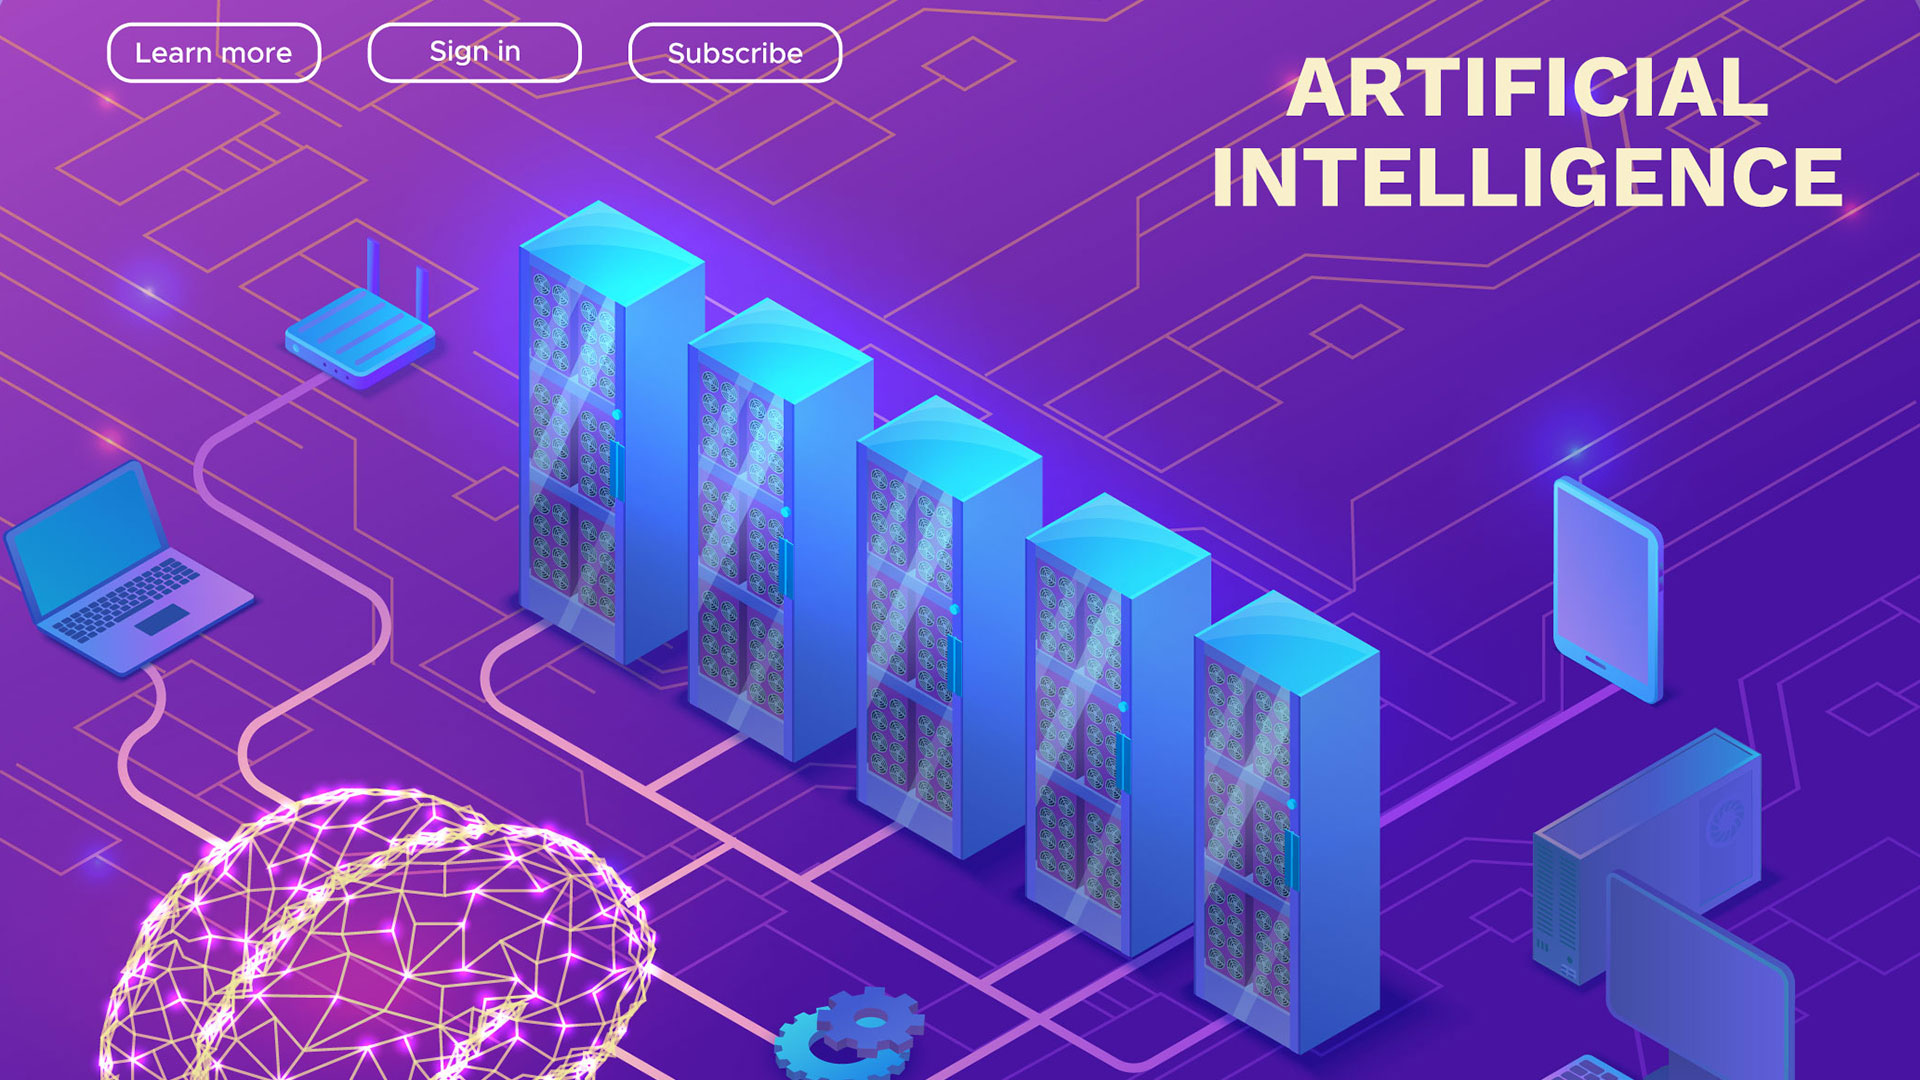 Artificial Intelligence in Business